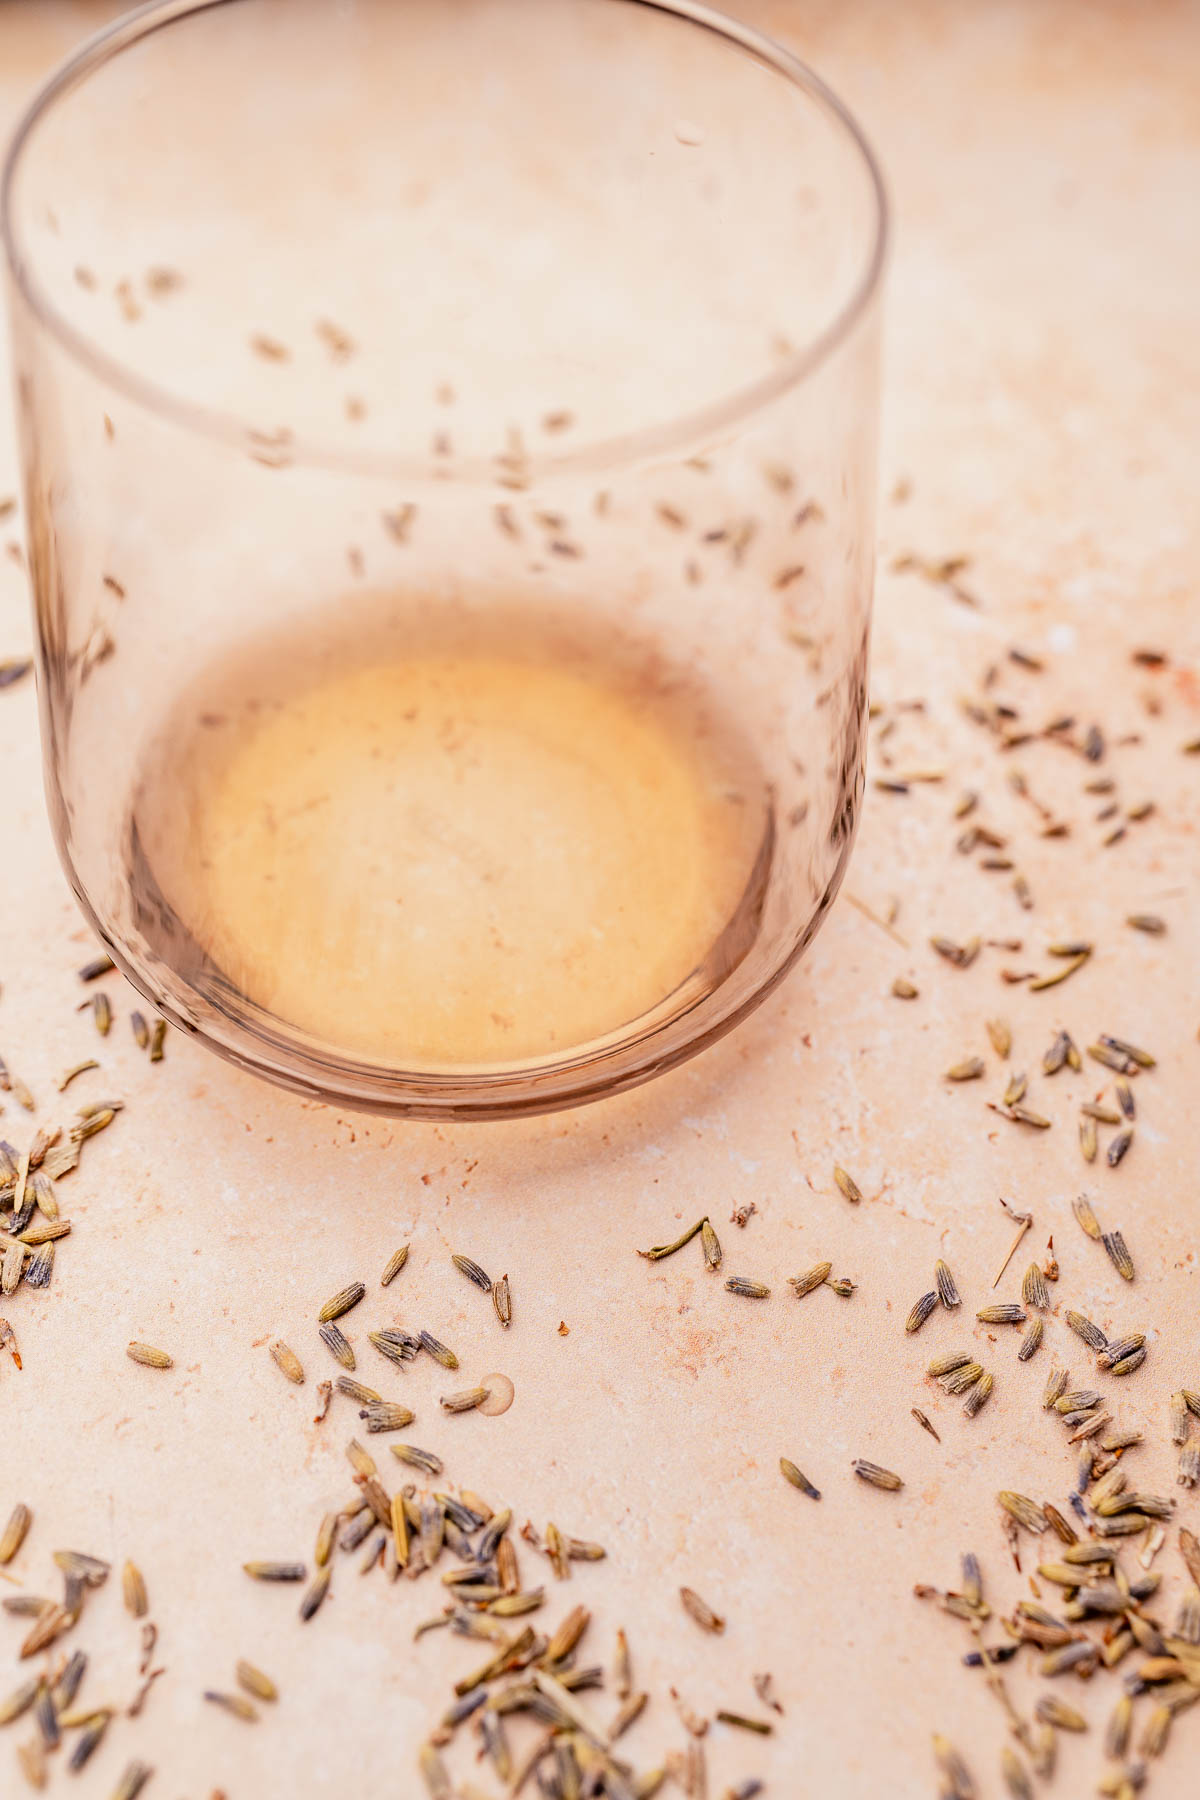 An empty glass with traces of an Iced Lavender Oatmilk Latte, surrounded by scattered cumin seeds on a beige surface.